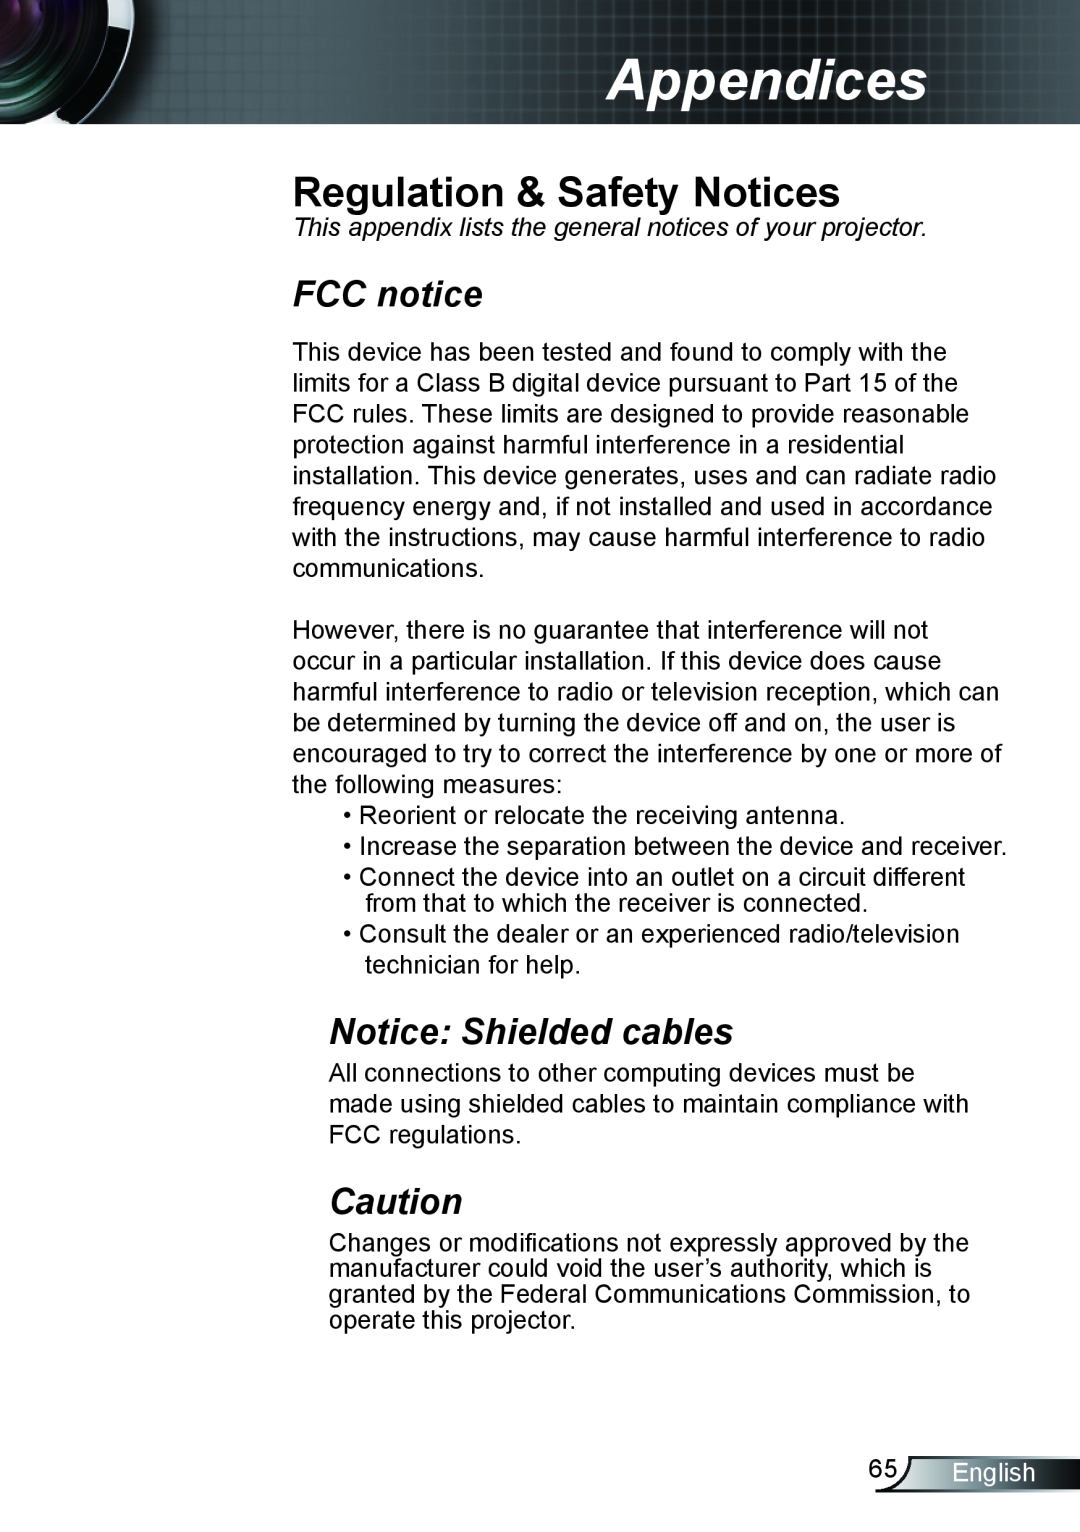 Optoma Technology TX610ST manual Regulation & Safety Notices, FCC notice, Notice Shielded cables, English, Appendices 